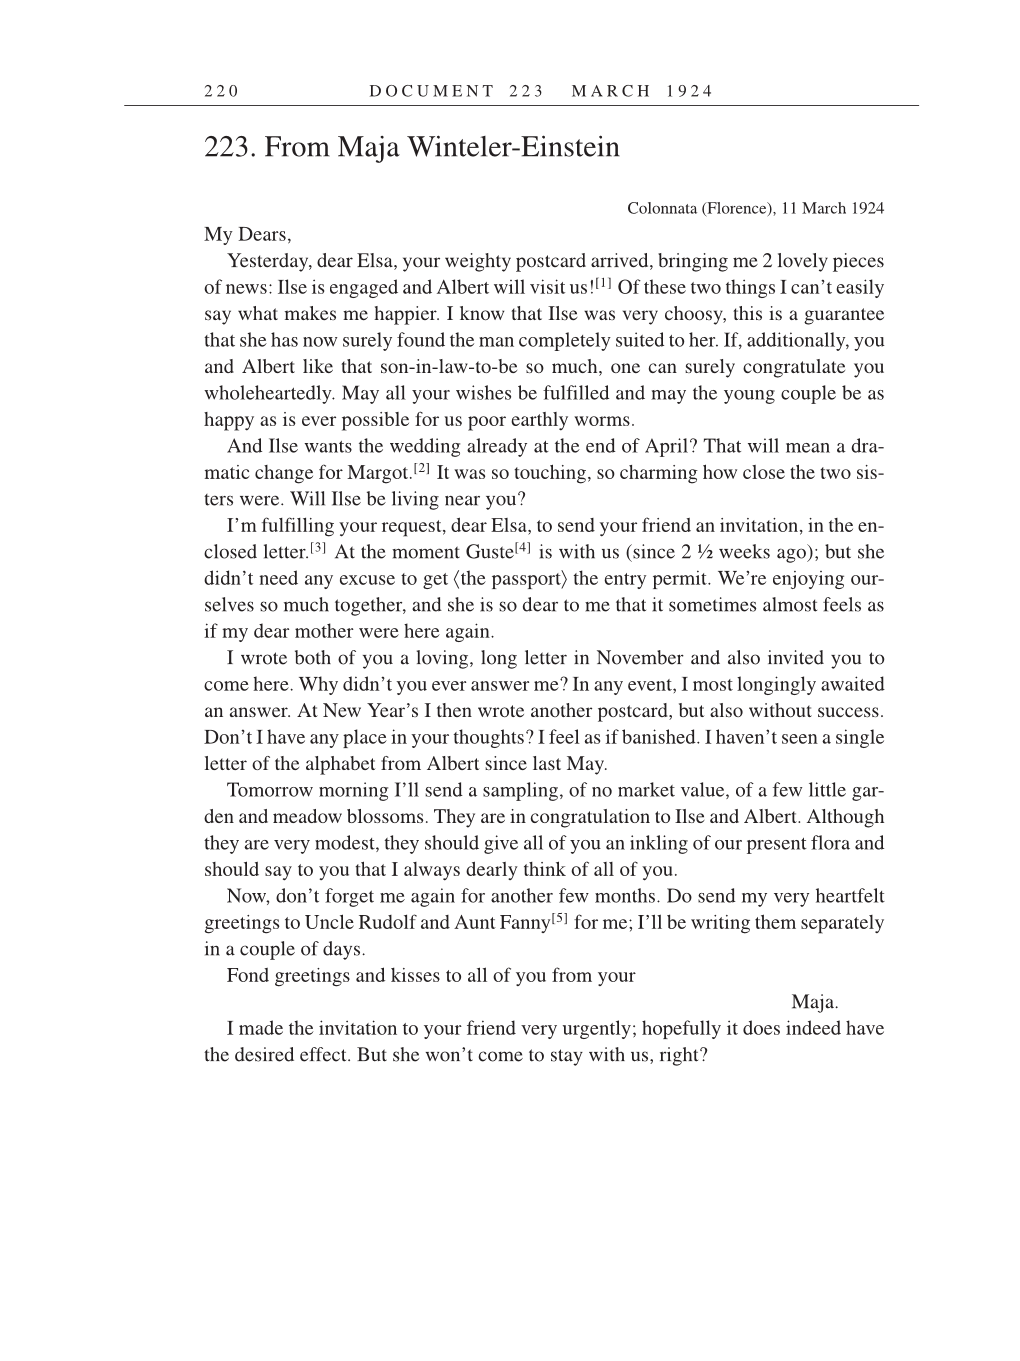 Volume 14: The Berlin Years: Writings & Correspondence, April 1923-May 1925 (English Translation Supplement) page 220